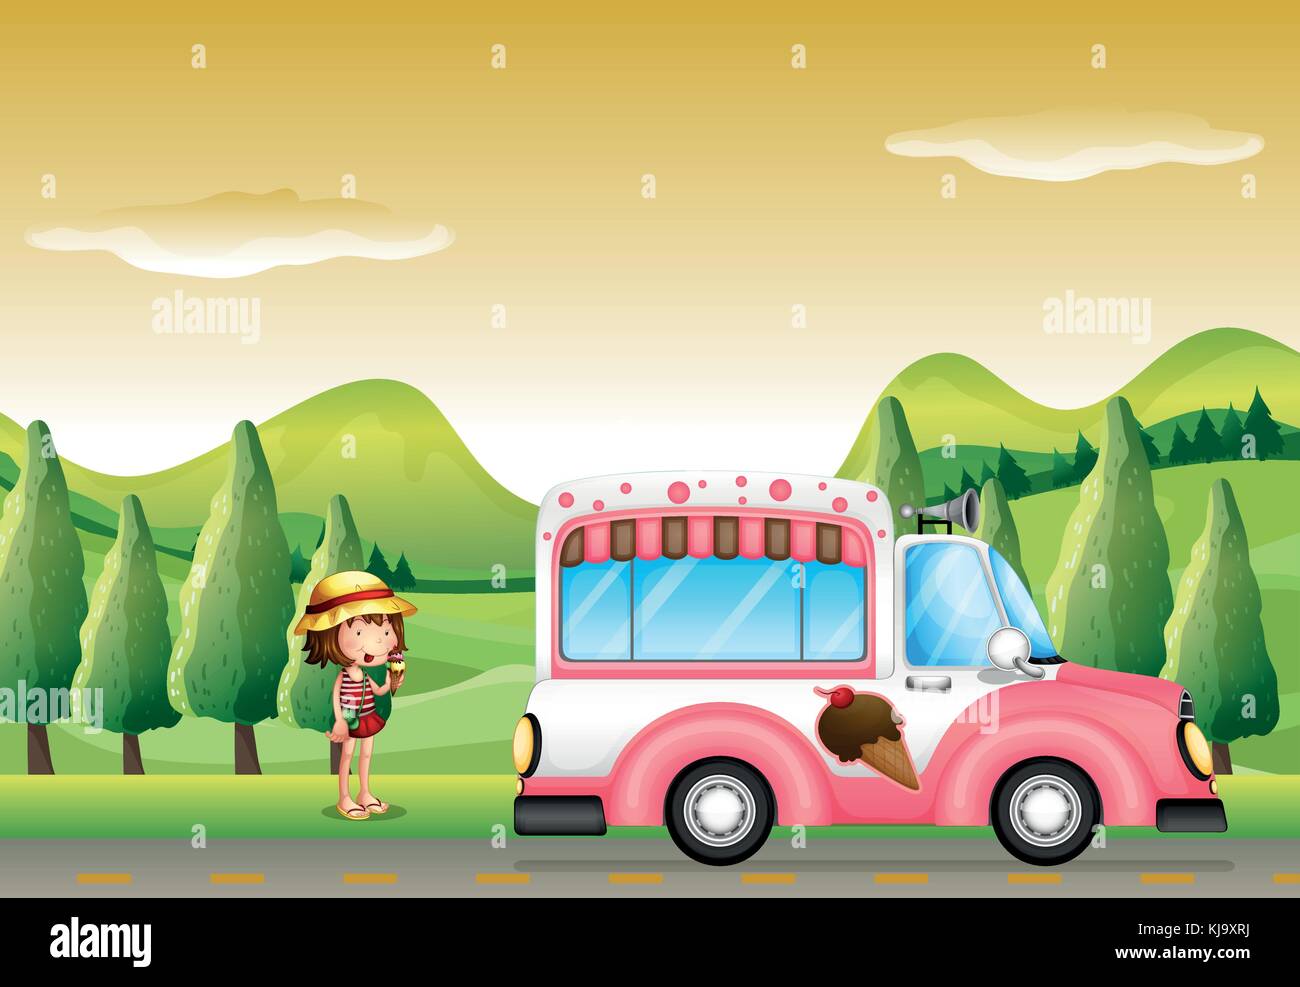 Illustration of a pink ice cream bus and the little girl Stock Vector